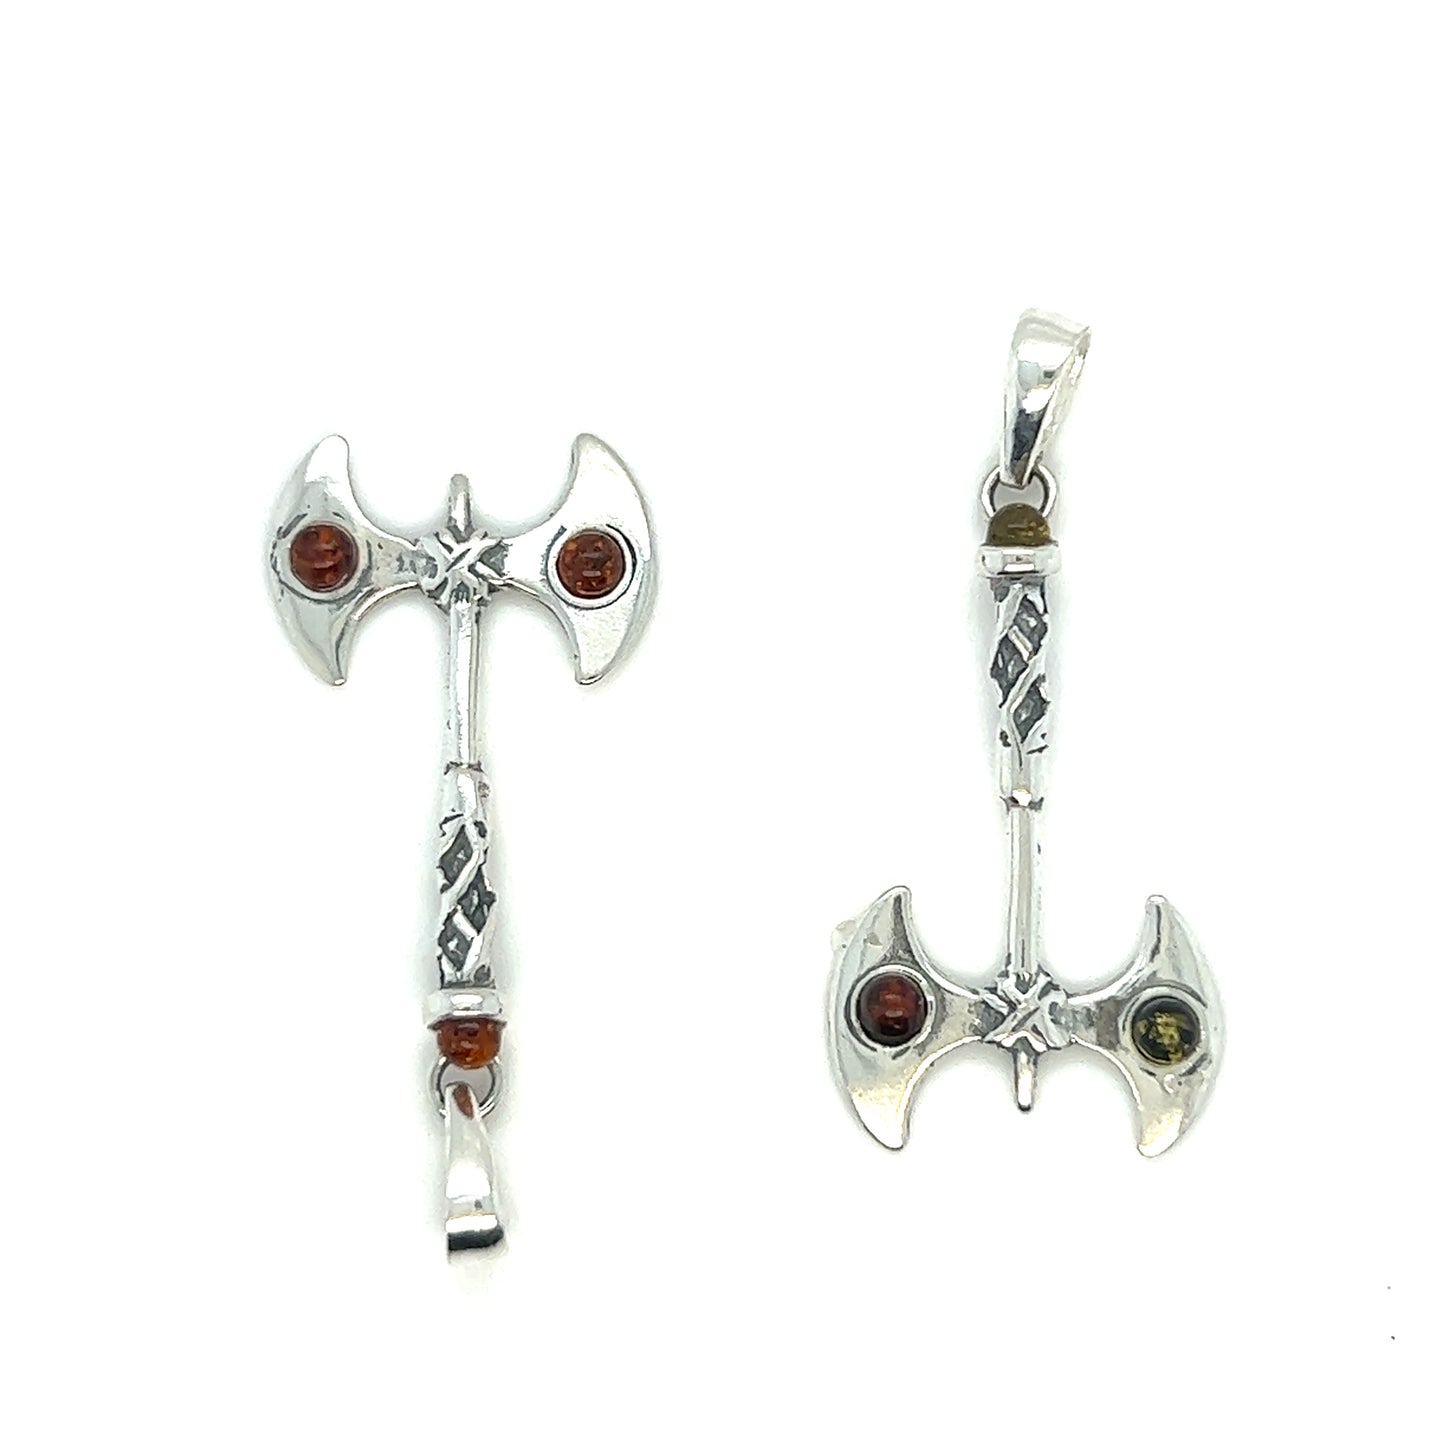 A pair of Super Silver Amber Accented Battle Axe Pendants, perfect for the warrior within.